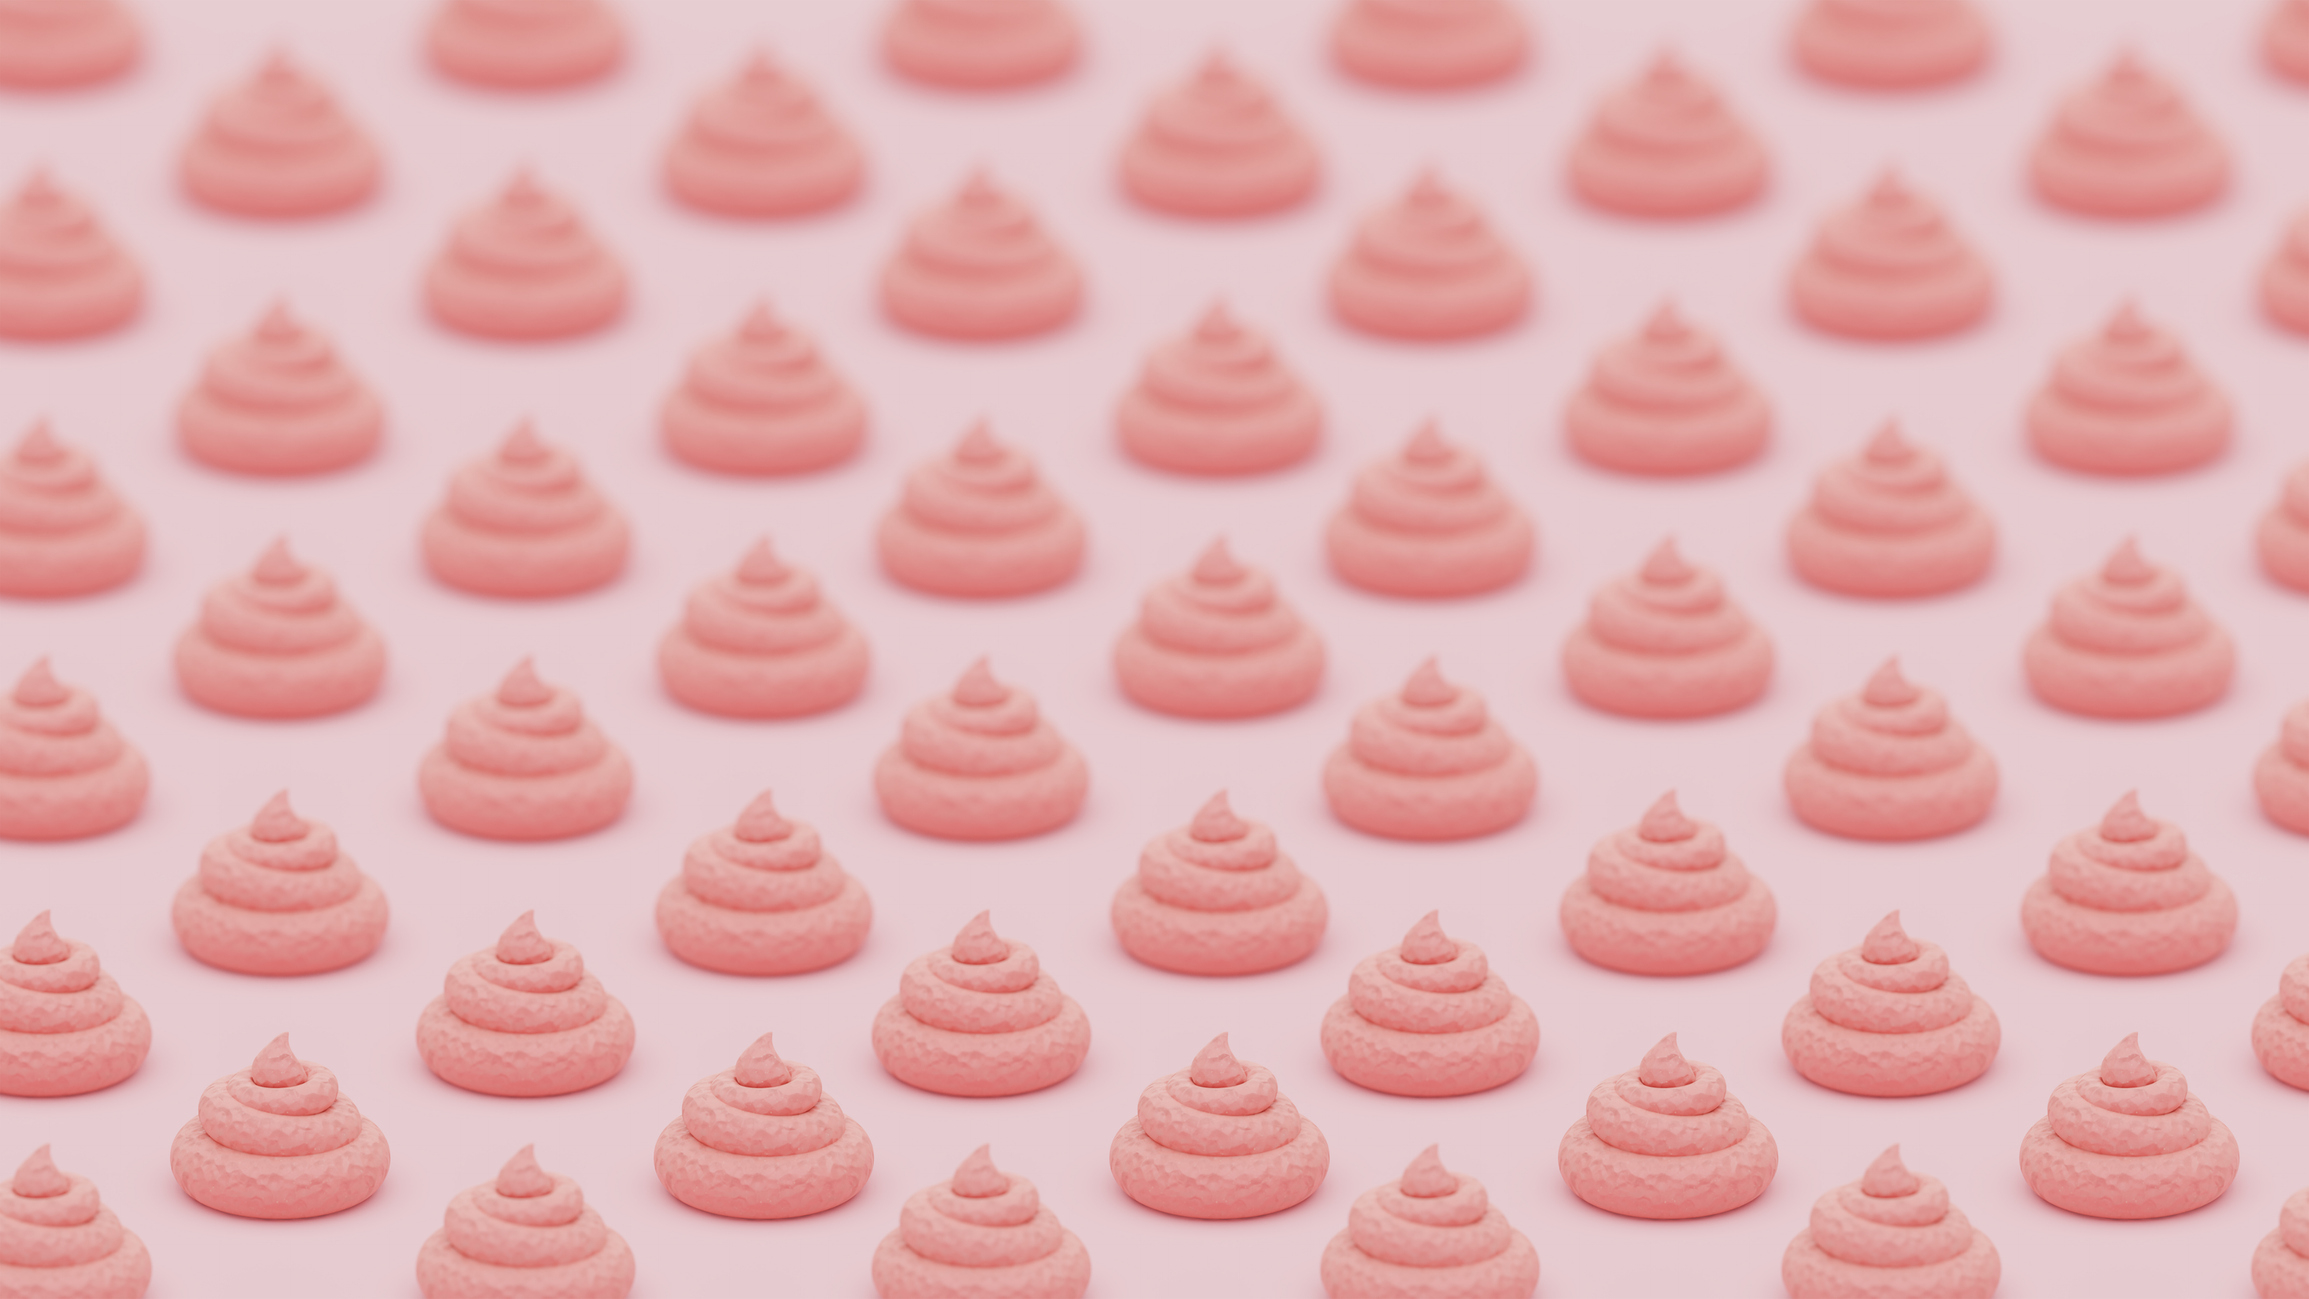 Multiple swirls of pink frosting arranged in a grid pattern on a light background